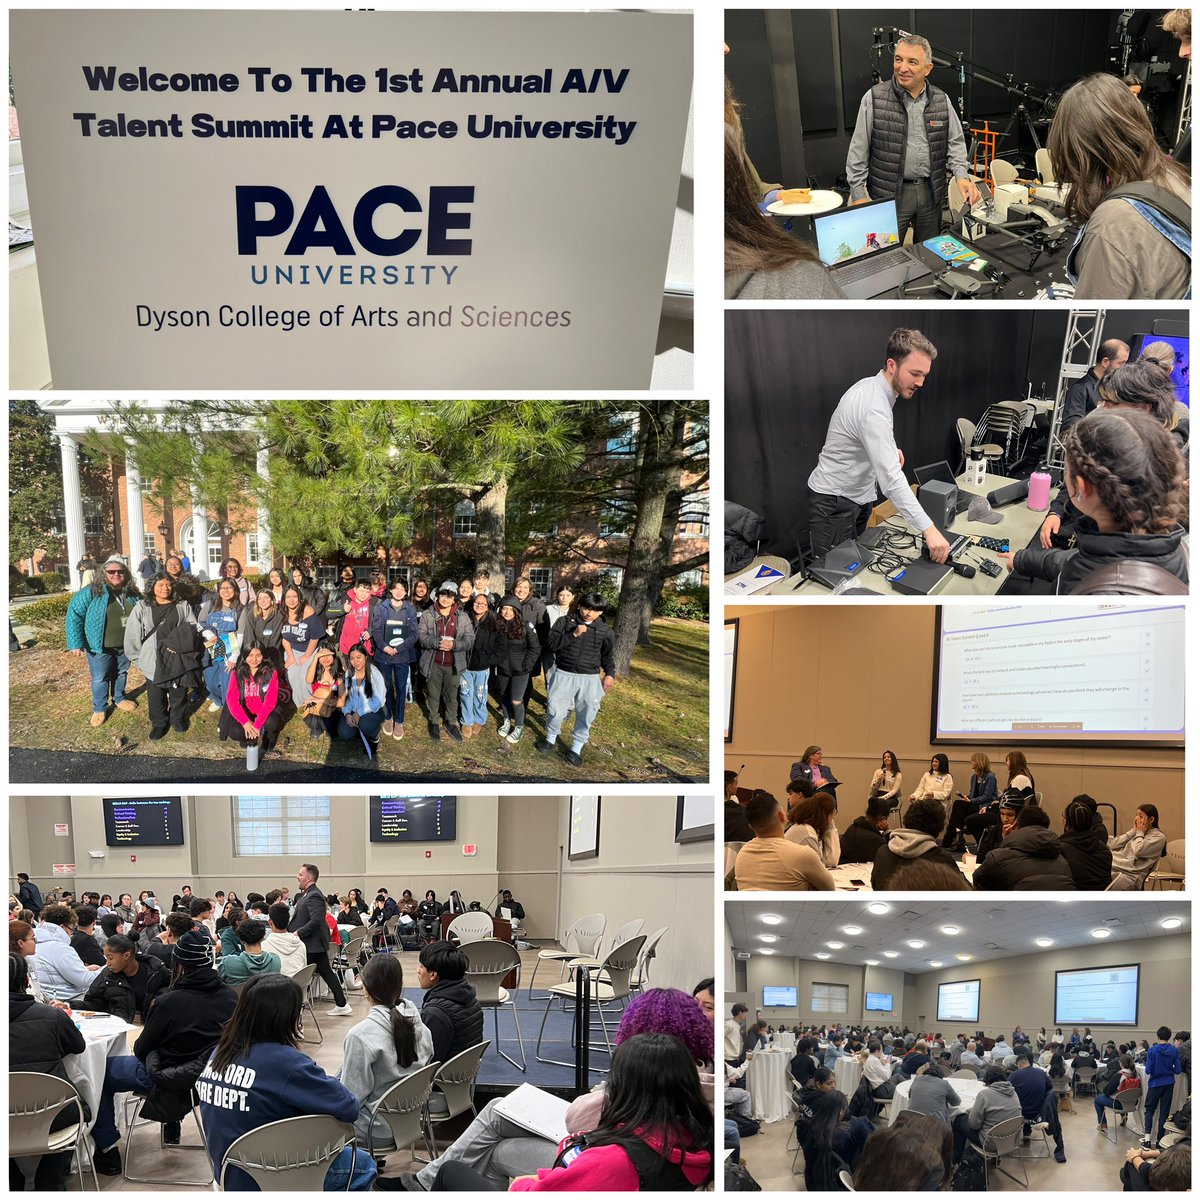 Exciting day as our WP high school students attended the 1st Annual Audio Visual Summit at Pace U. Presentations by industry professionals concentrated on A/V careers, networking via LinkedIn, tours through a broadcast studio and vendors showcasing new products. @WPTigerPride